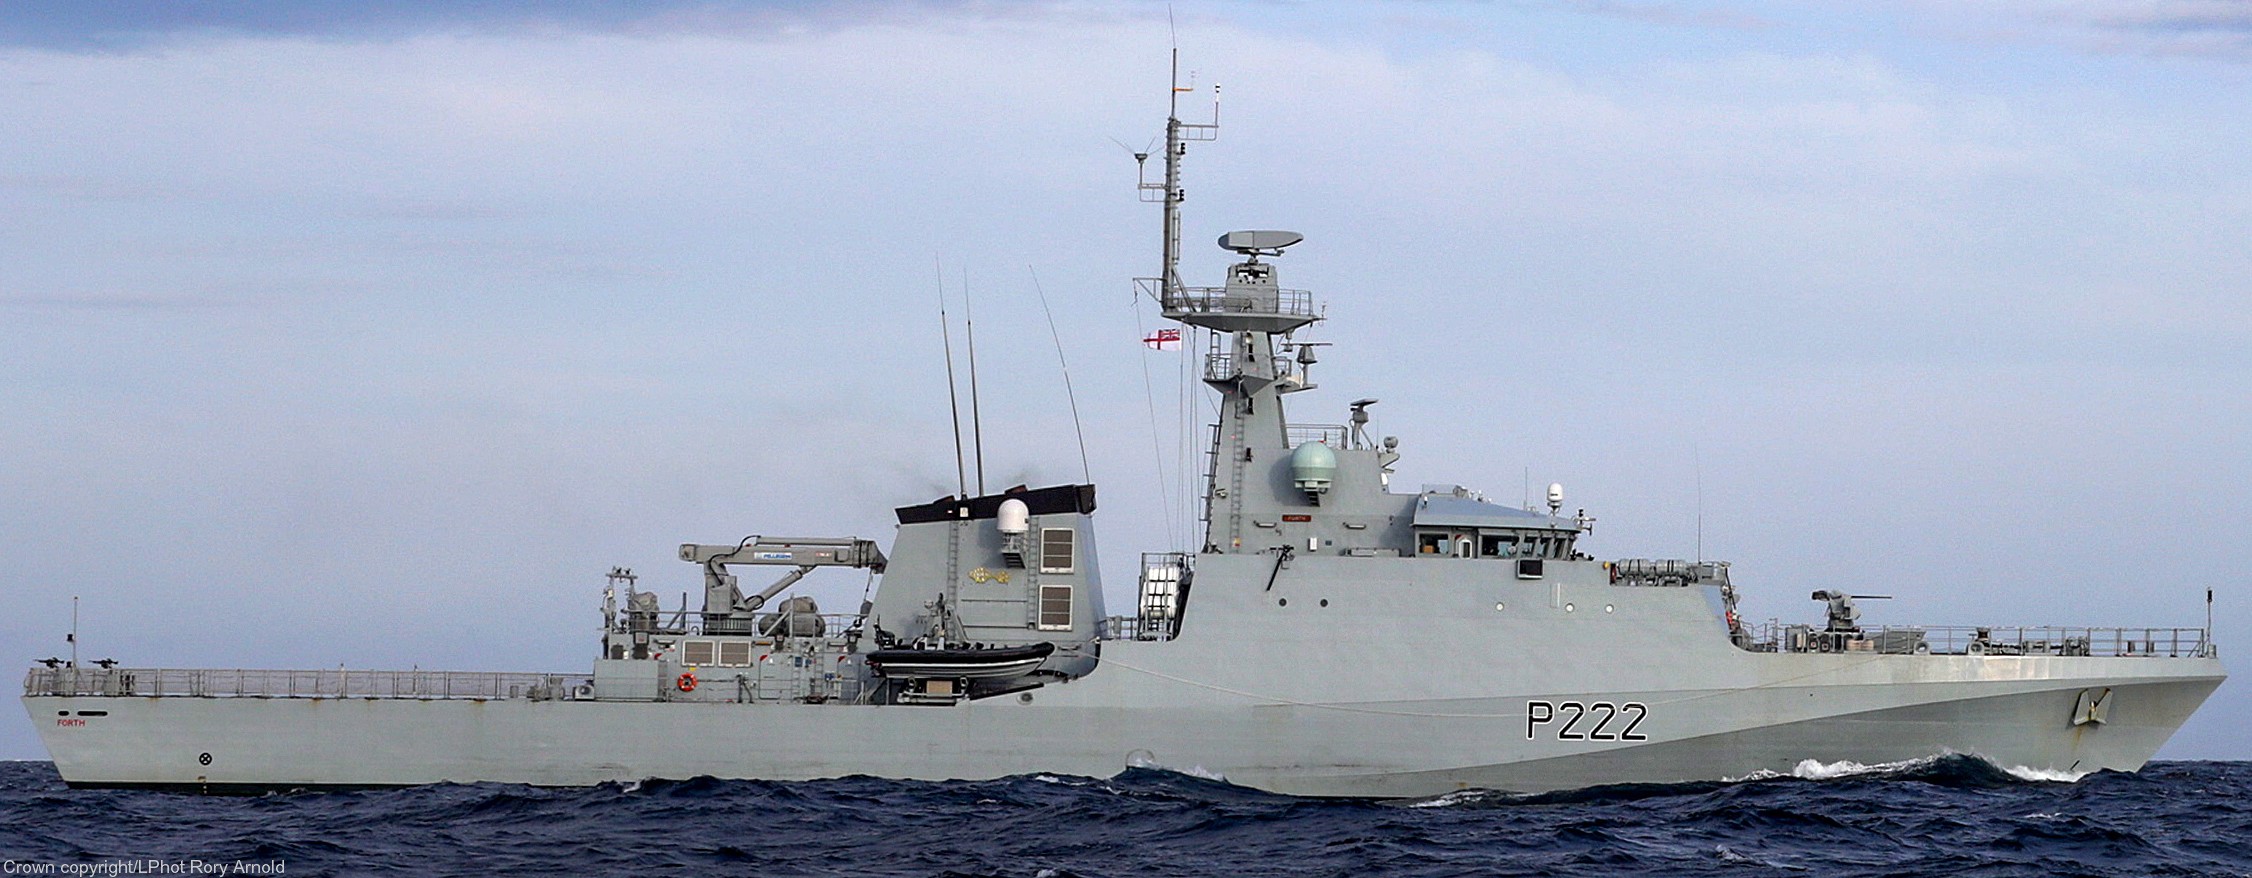 p222 hms forth river class offshore patrol vessel opv royal navy 10